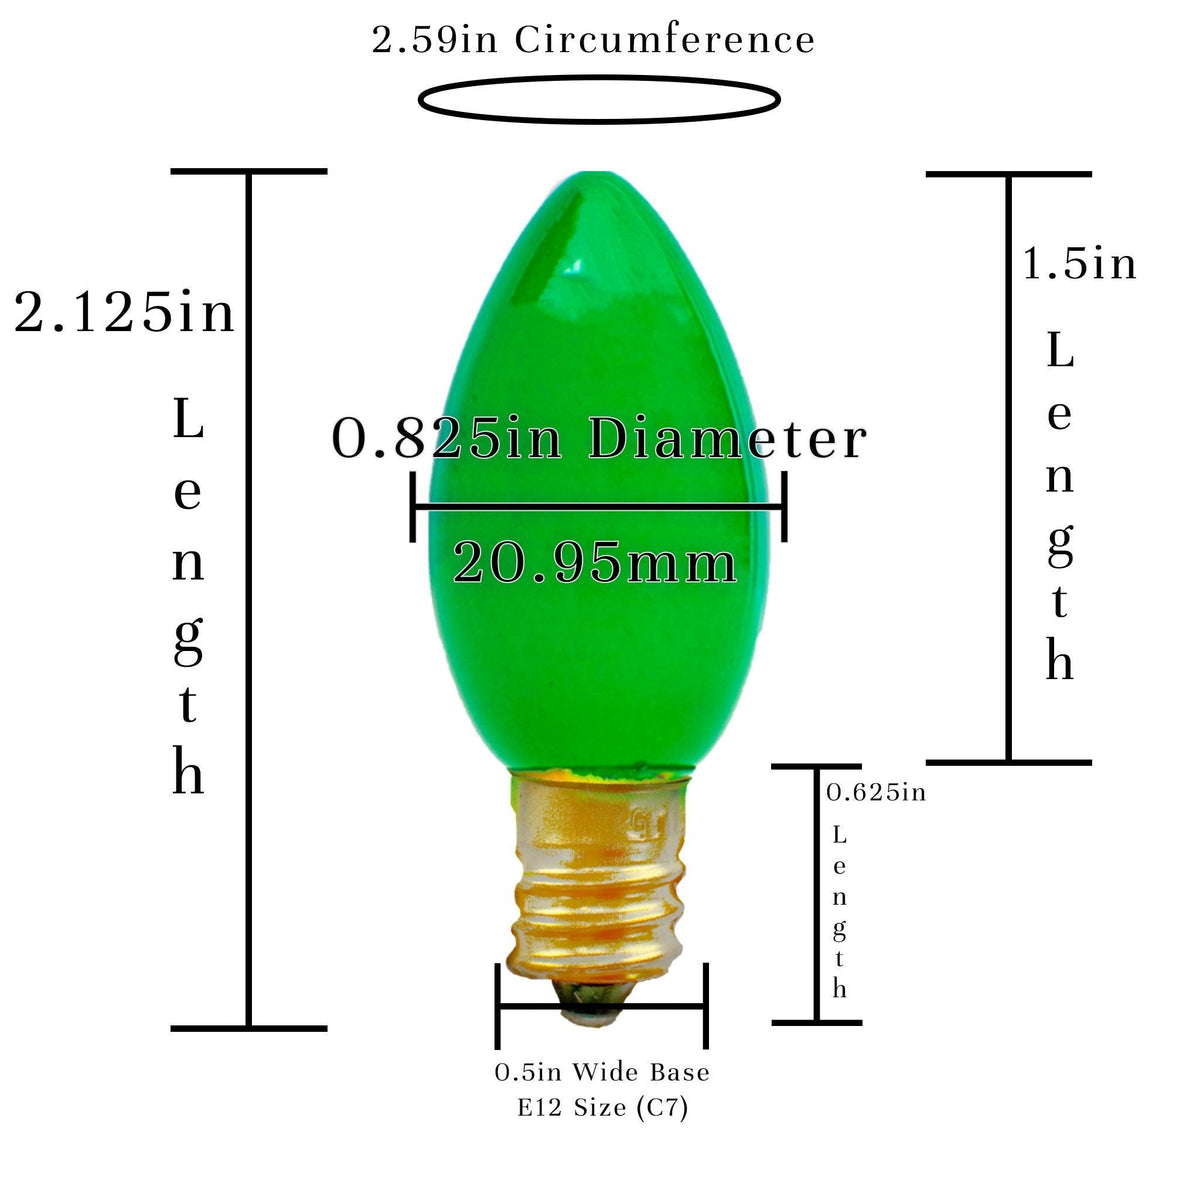 Size of a C7 Light Bulb in Solid Green color.  On sale at leedisplay.com